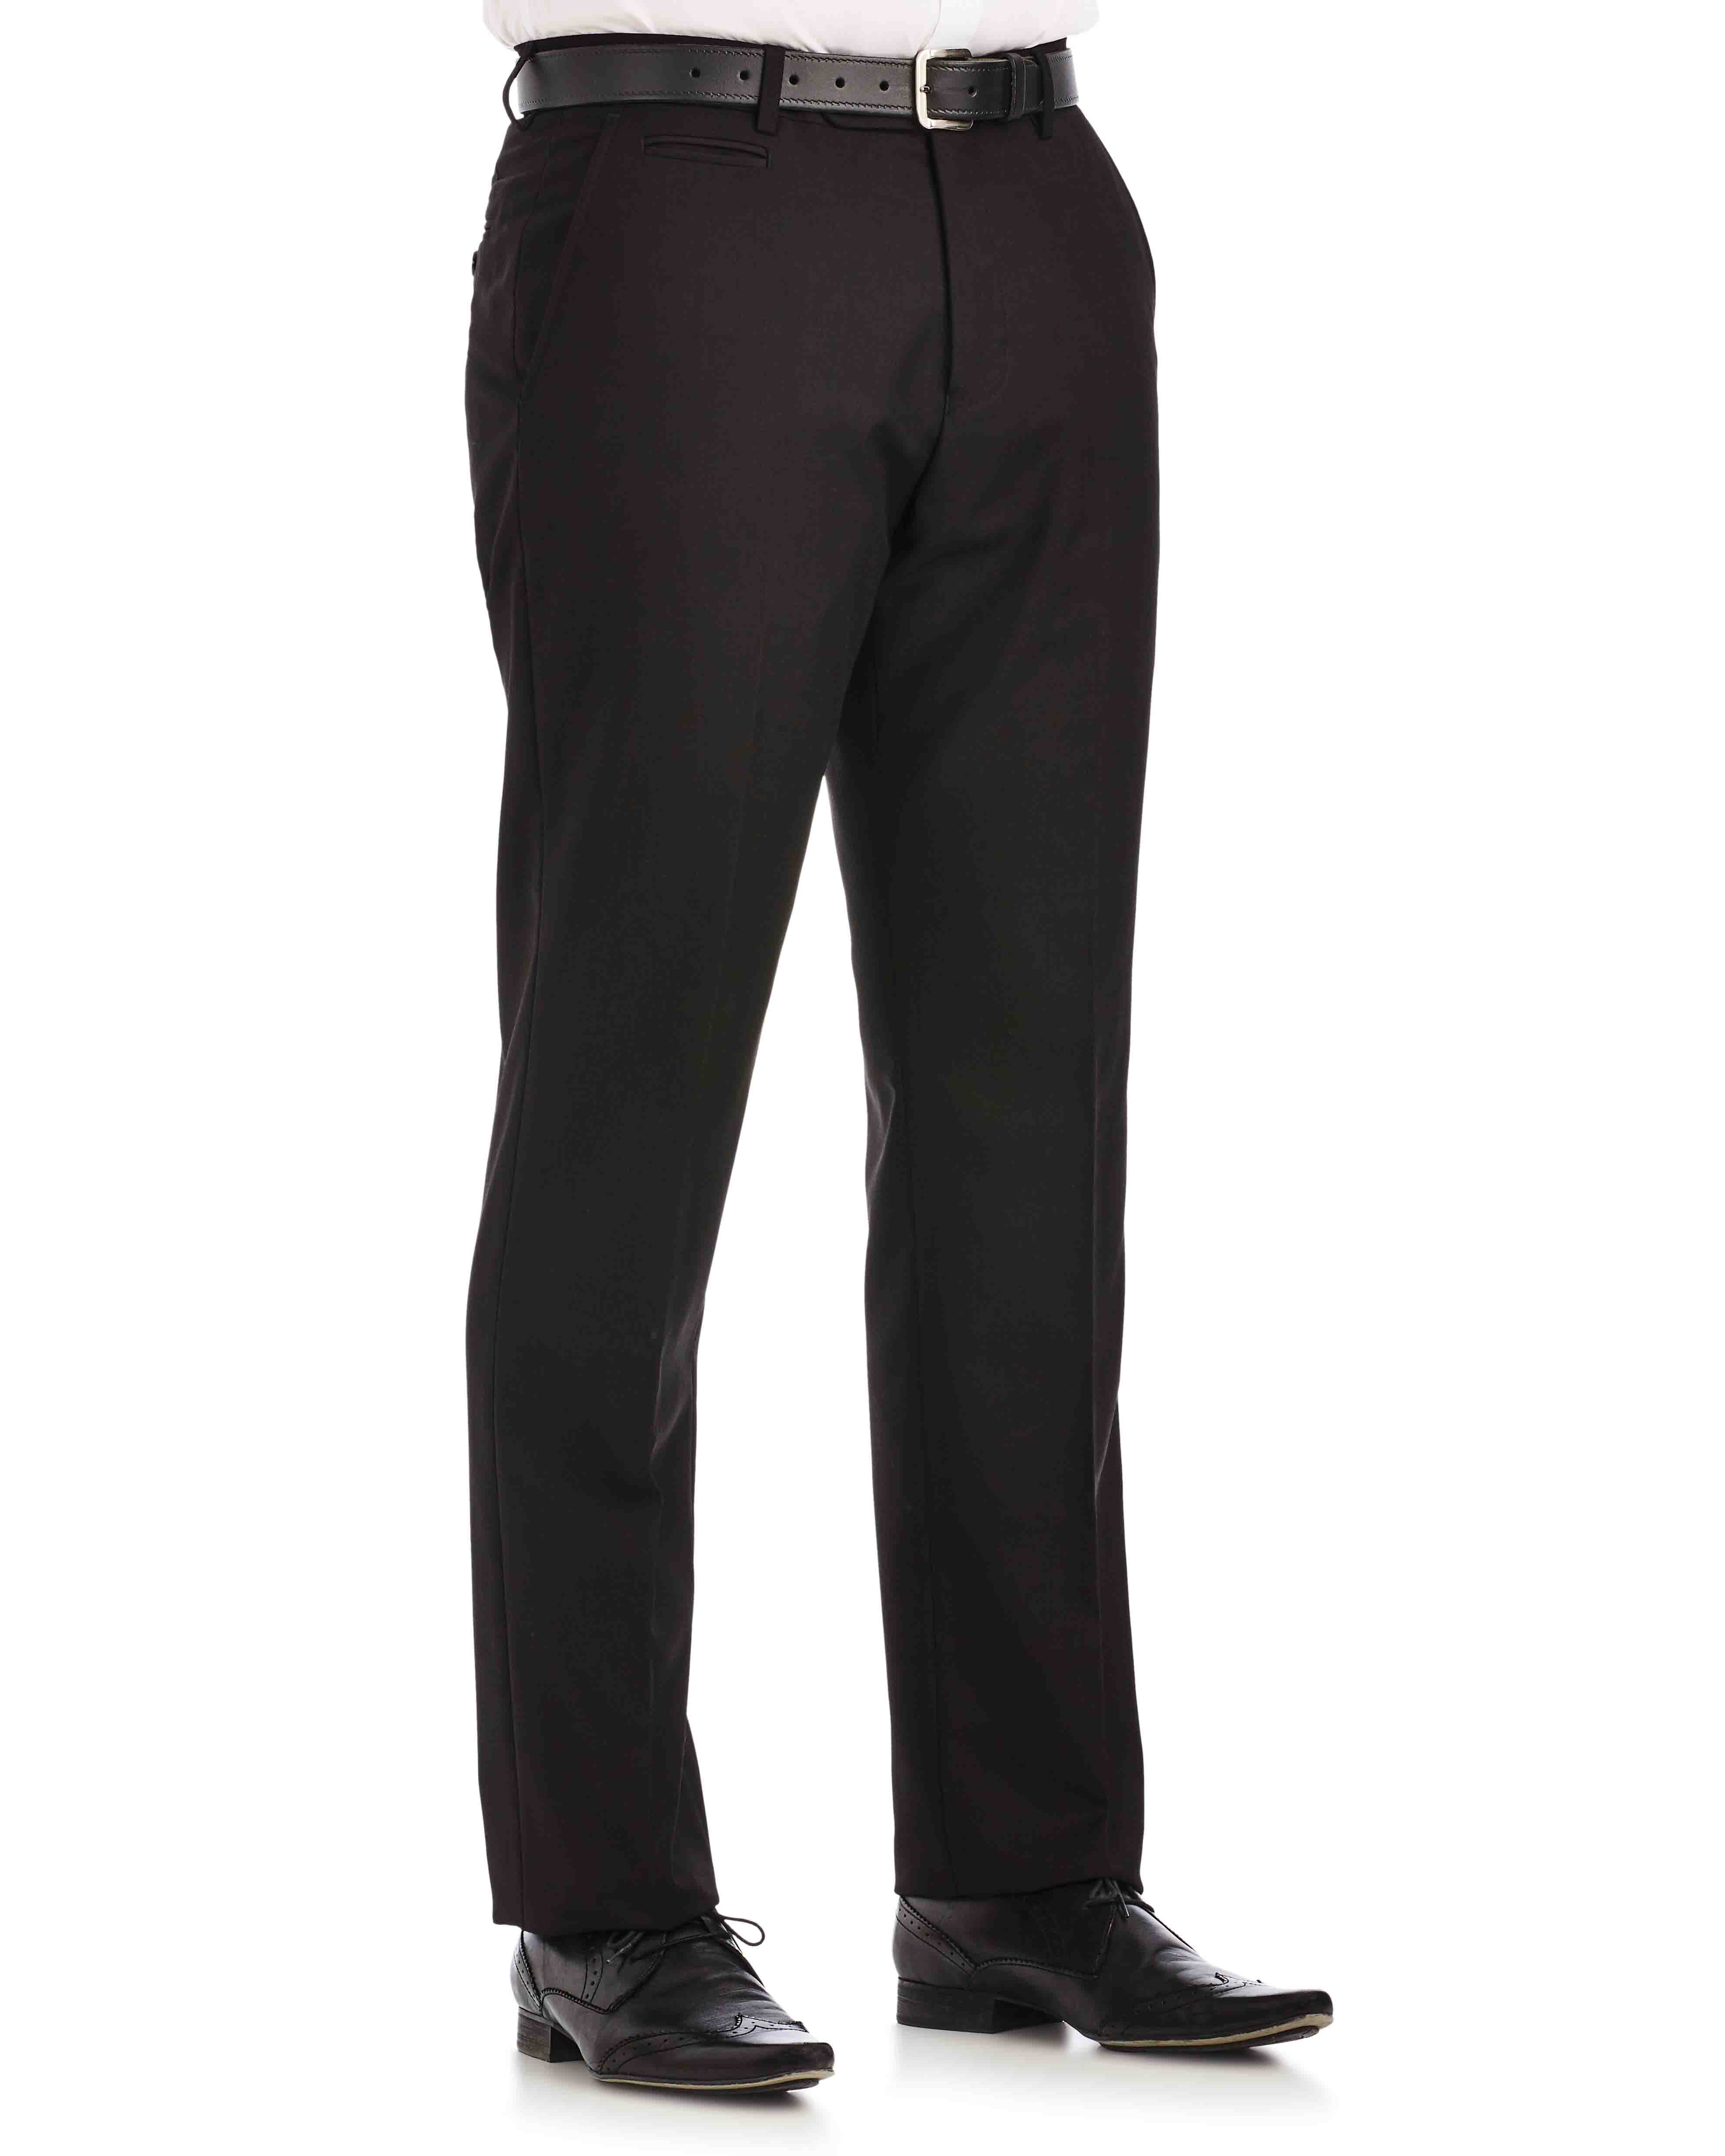 Men's Tailored Trousers | Sugdens | Corporate Clothing, Uniforms and ...